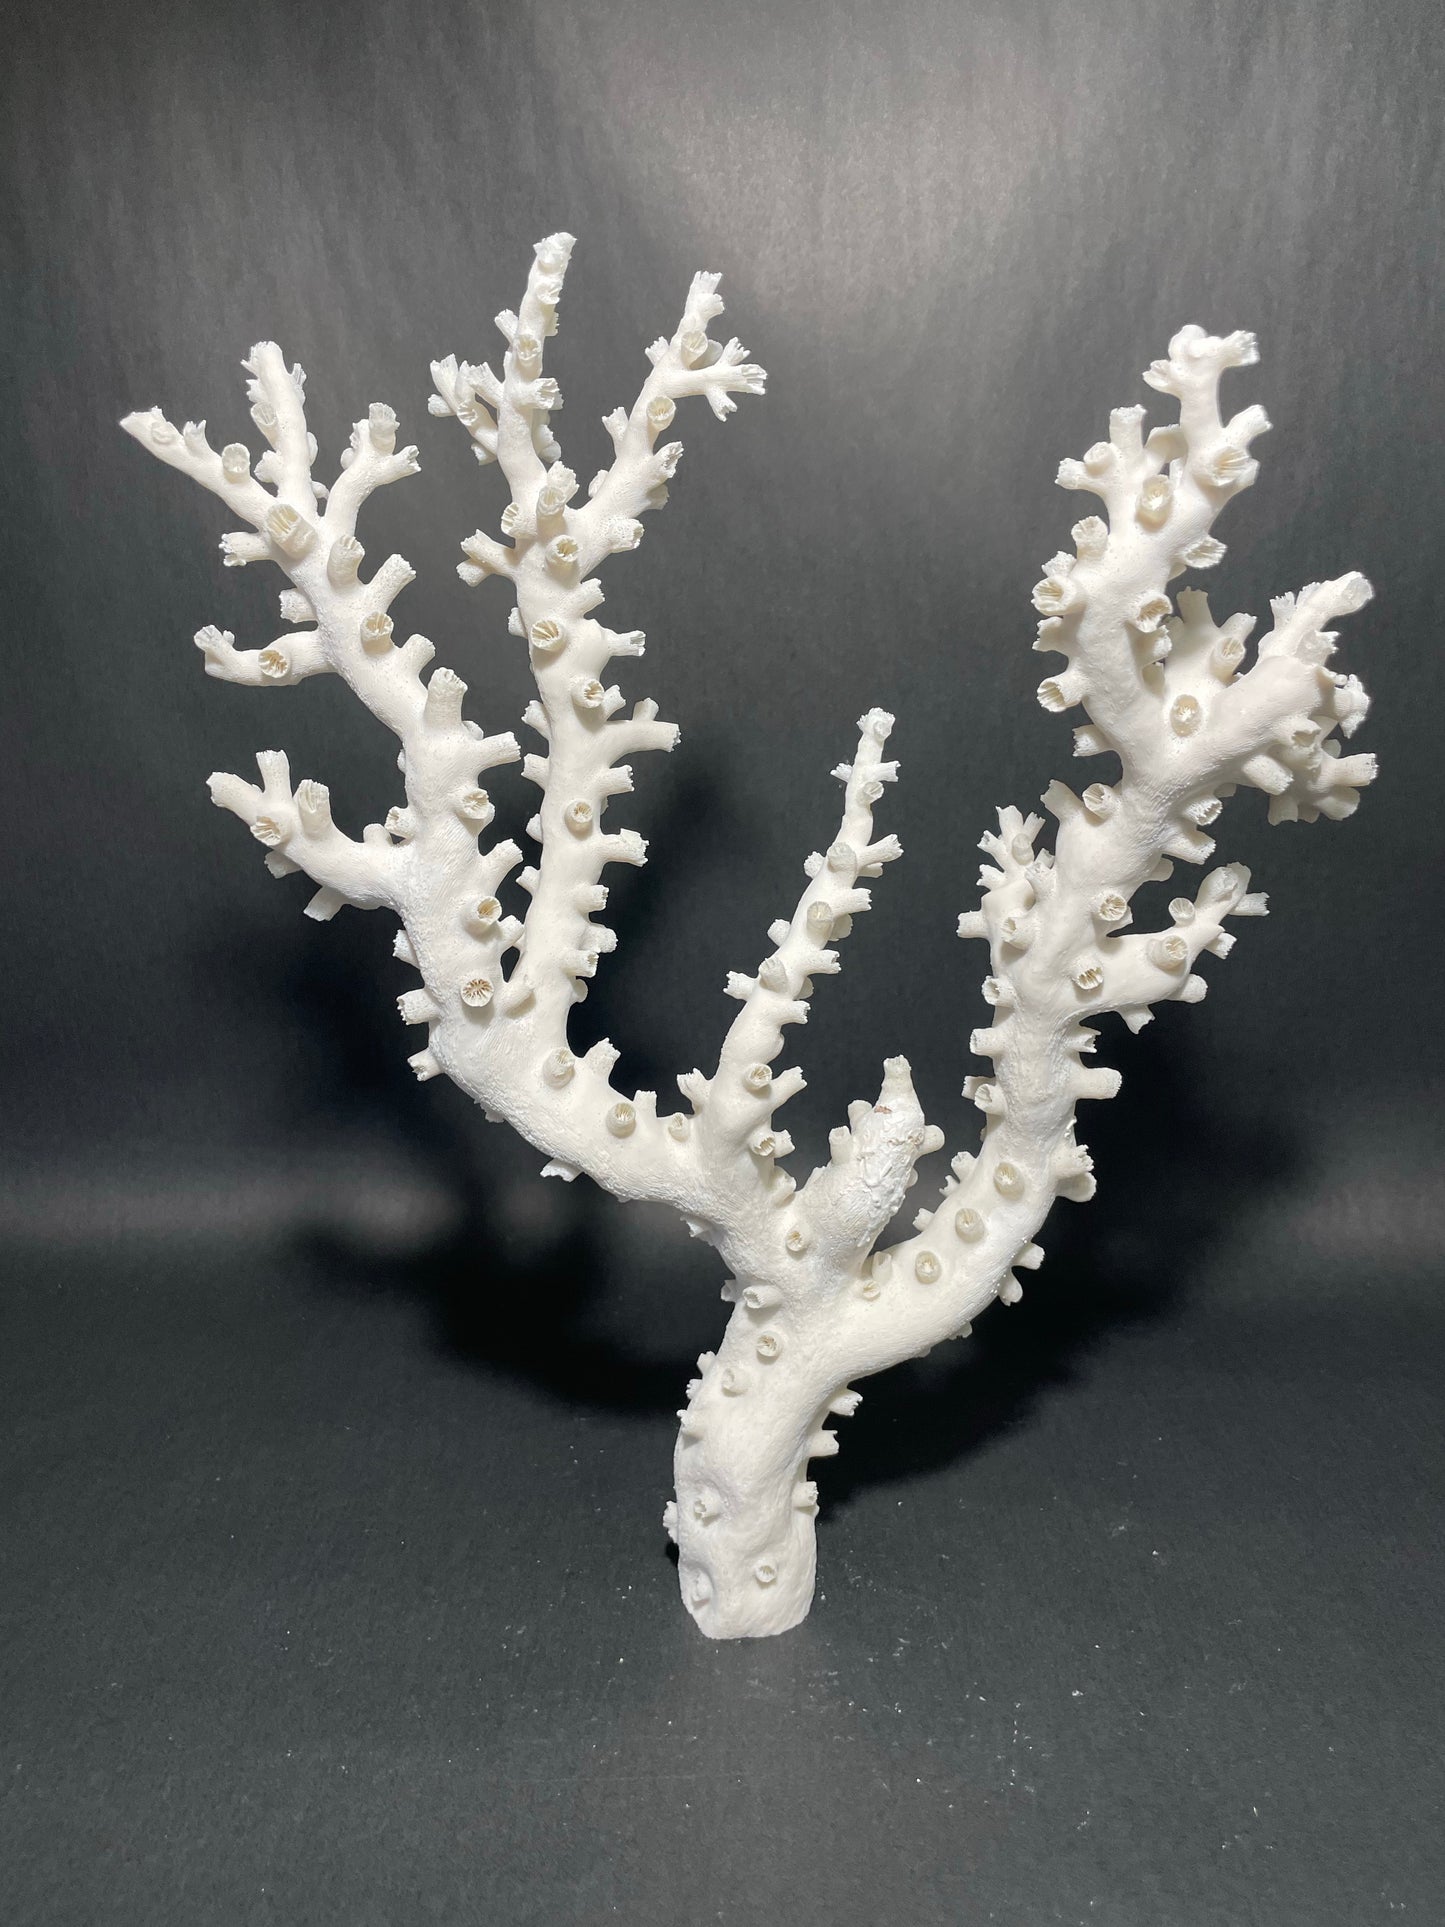 Octopus Coral (15”x13”x4”)